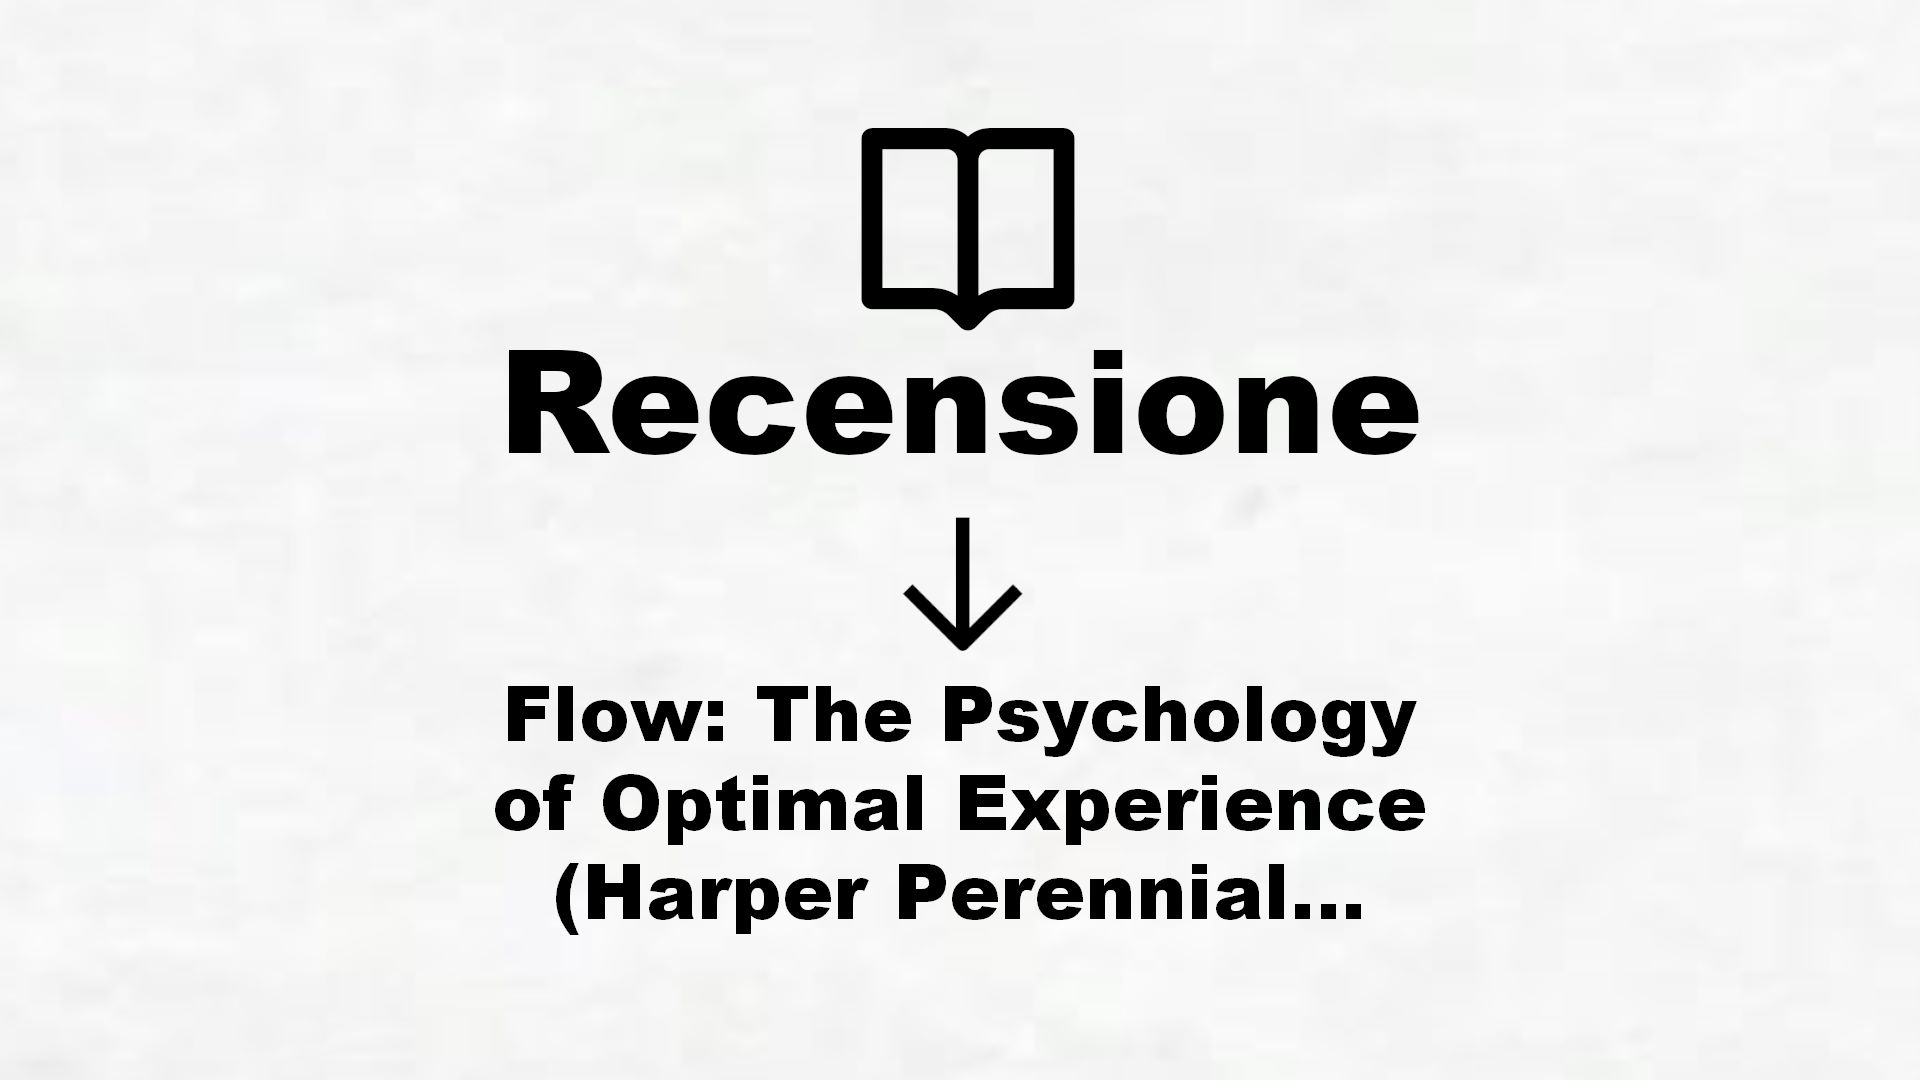 Flow: The Psychology of Optimal Experience (Harper Perennial Modern Classics) (English Edition) – Recensione Libro